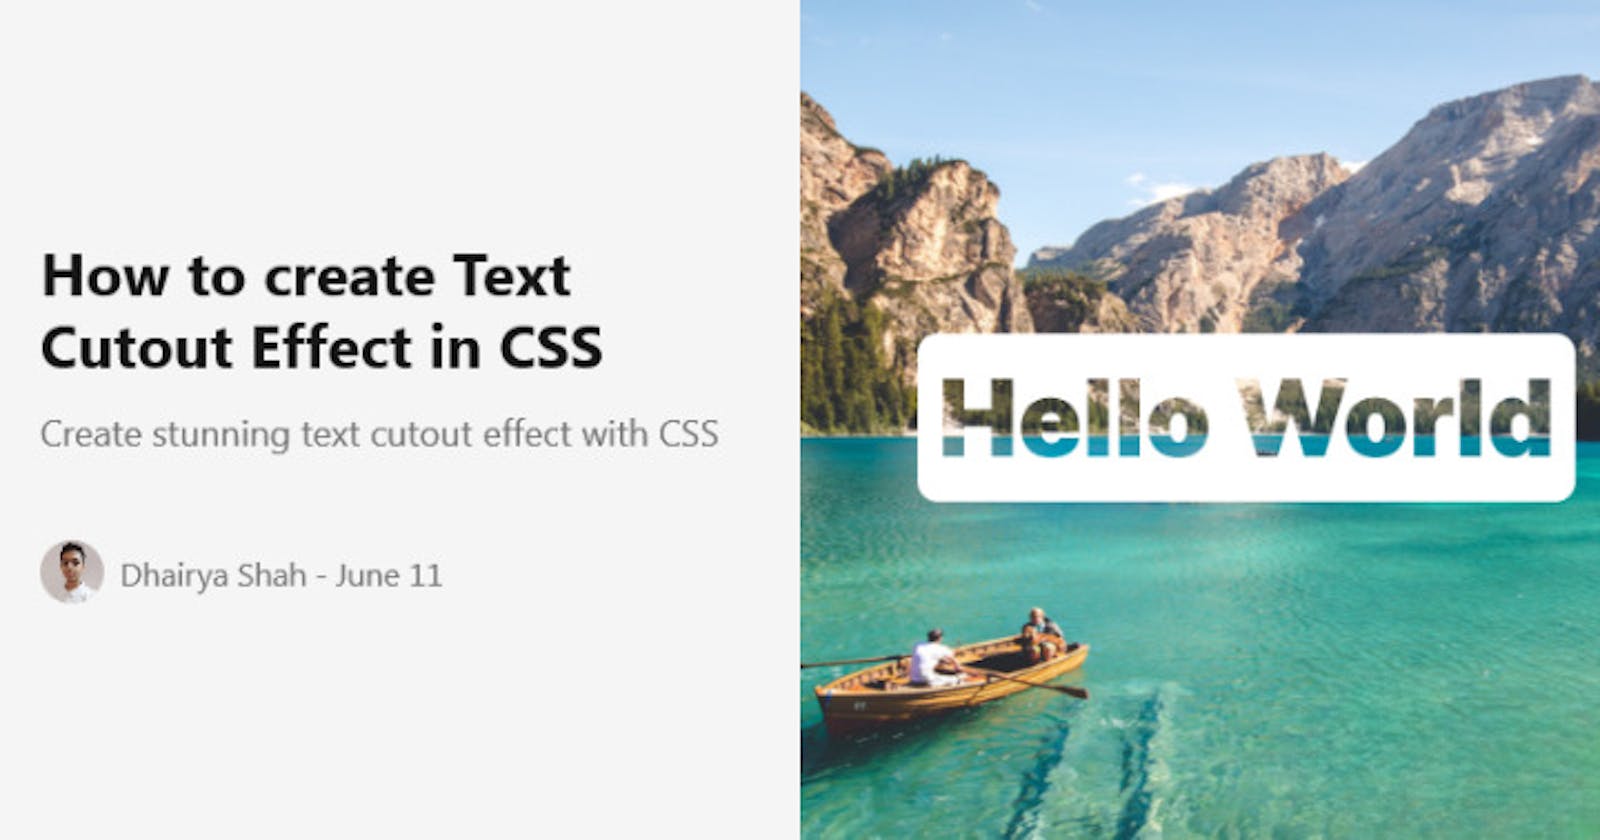 How to create Text Cutout Effect in CSS